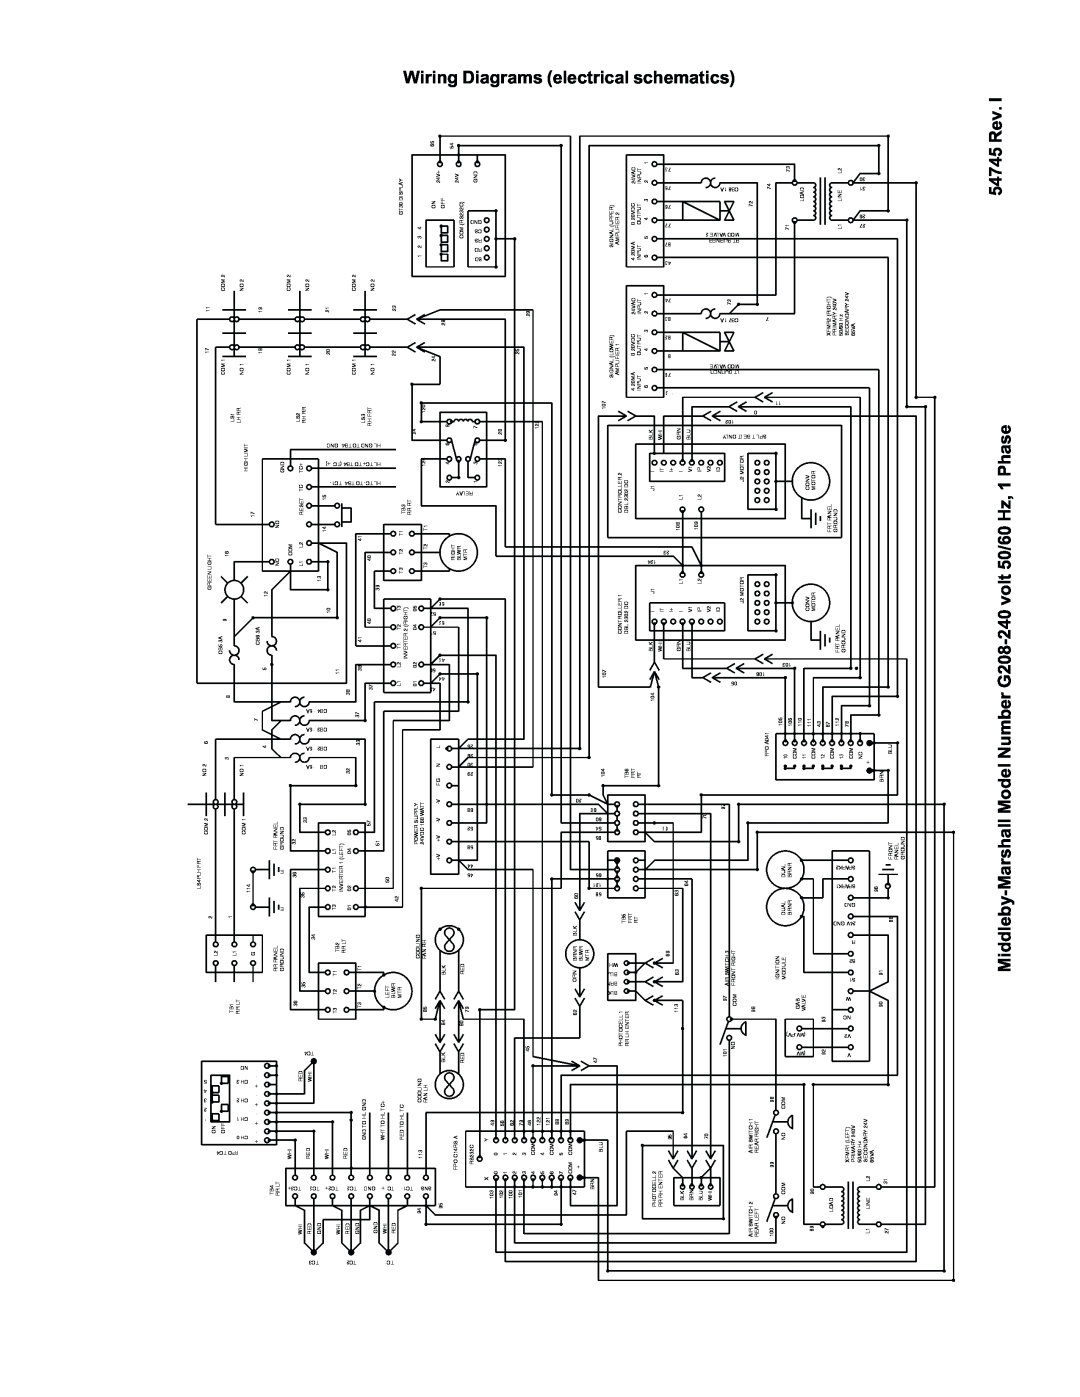 Middleby Cooking Systems Group PS870 Series manual Wiring Diagrams electrical schematics, 54745 Rev 